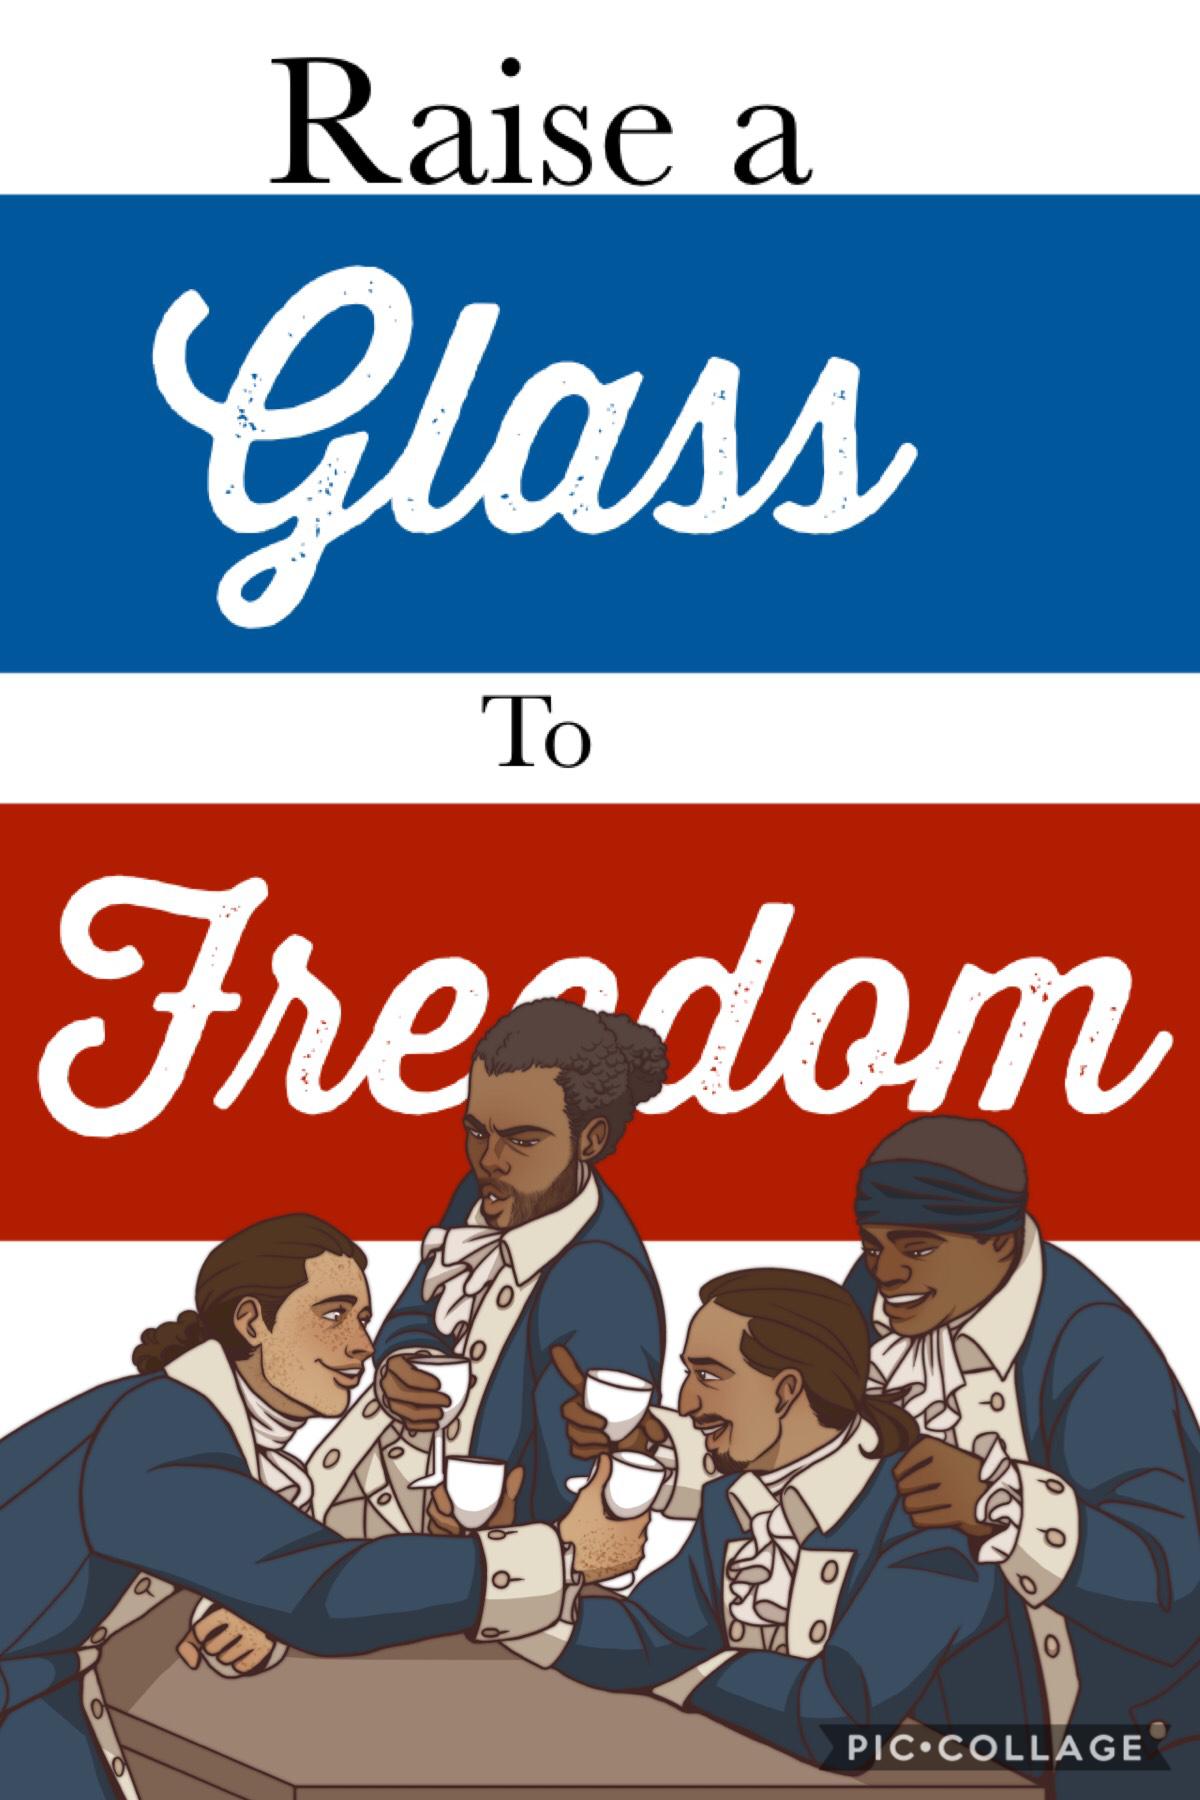 ⭐️Tap a Tap⭐️
I actually like this one...
What do you guys think?
“Raise a glass to freedom,”